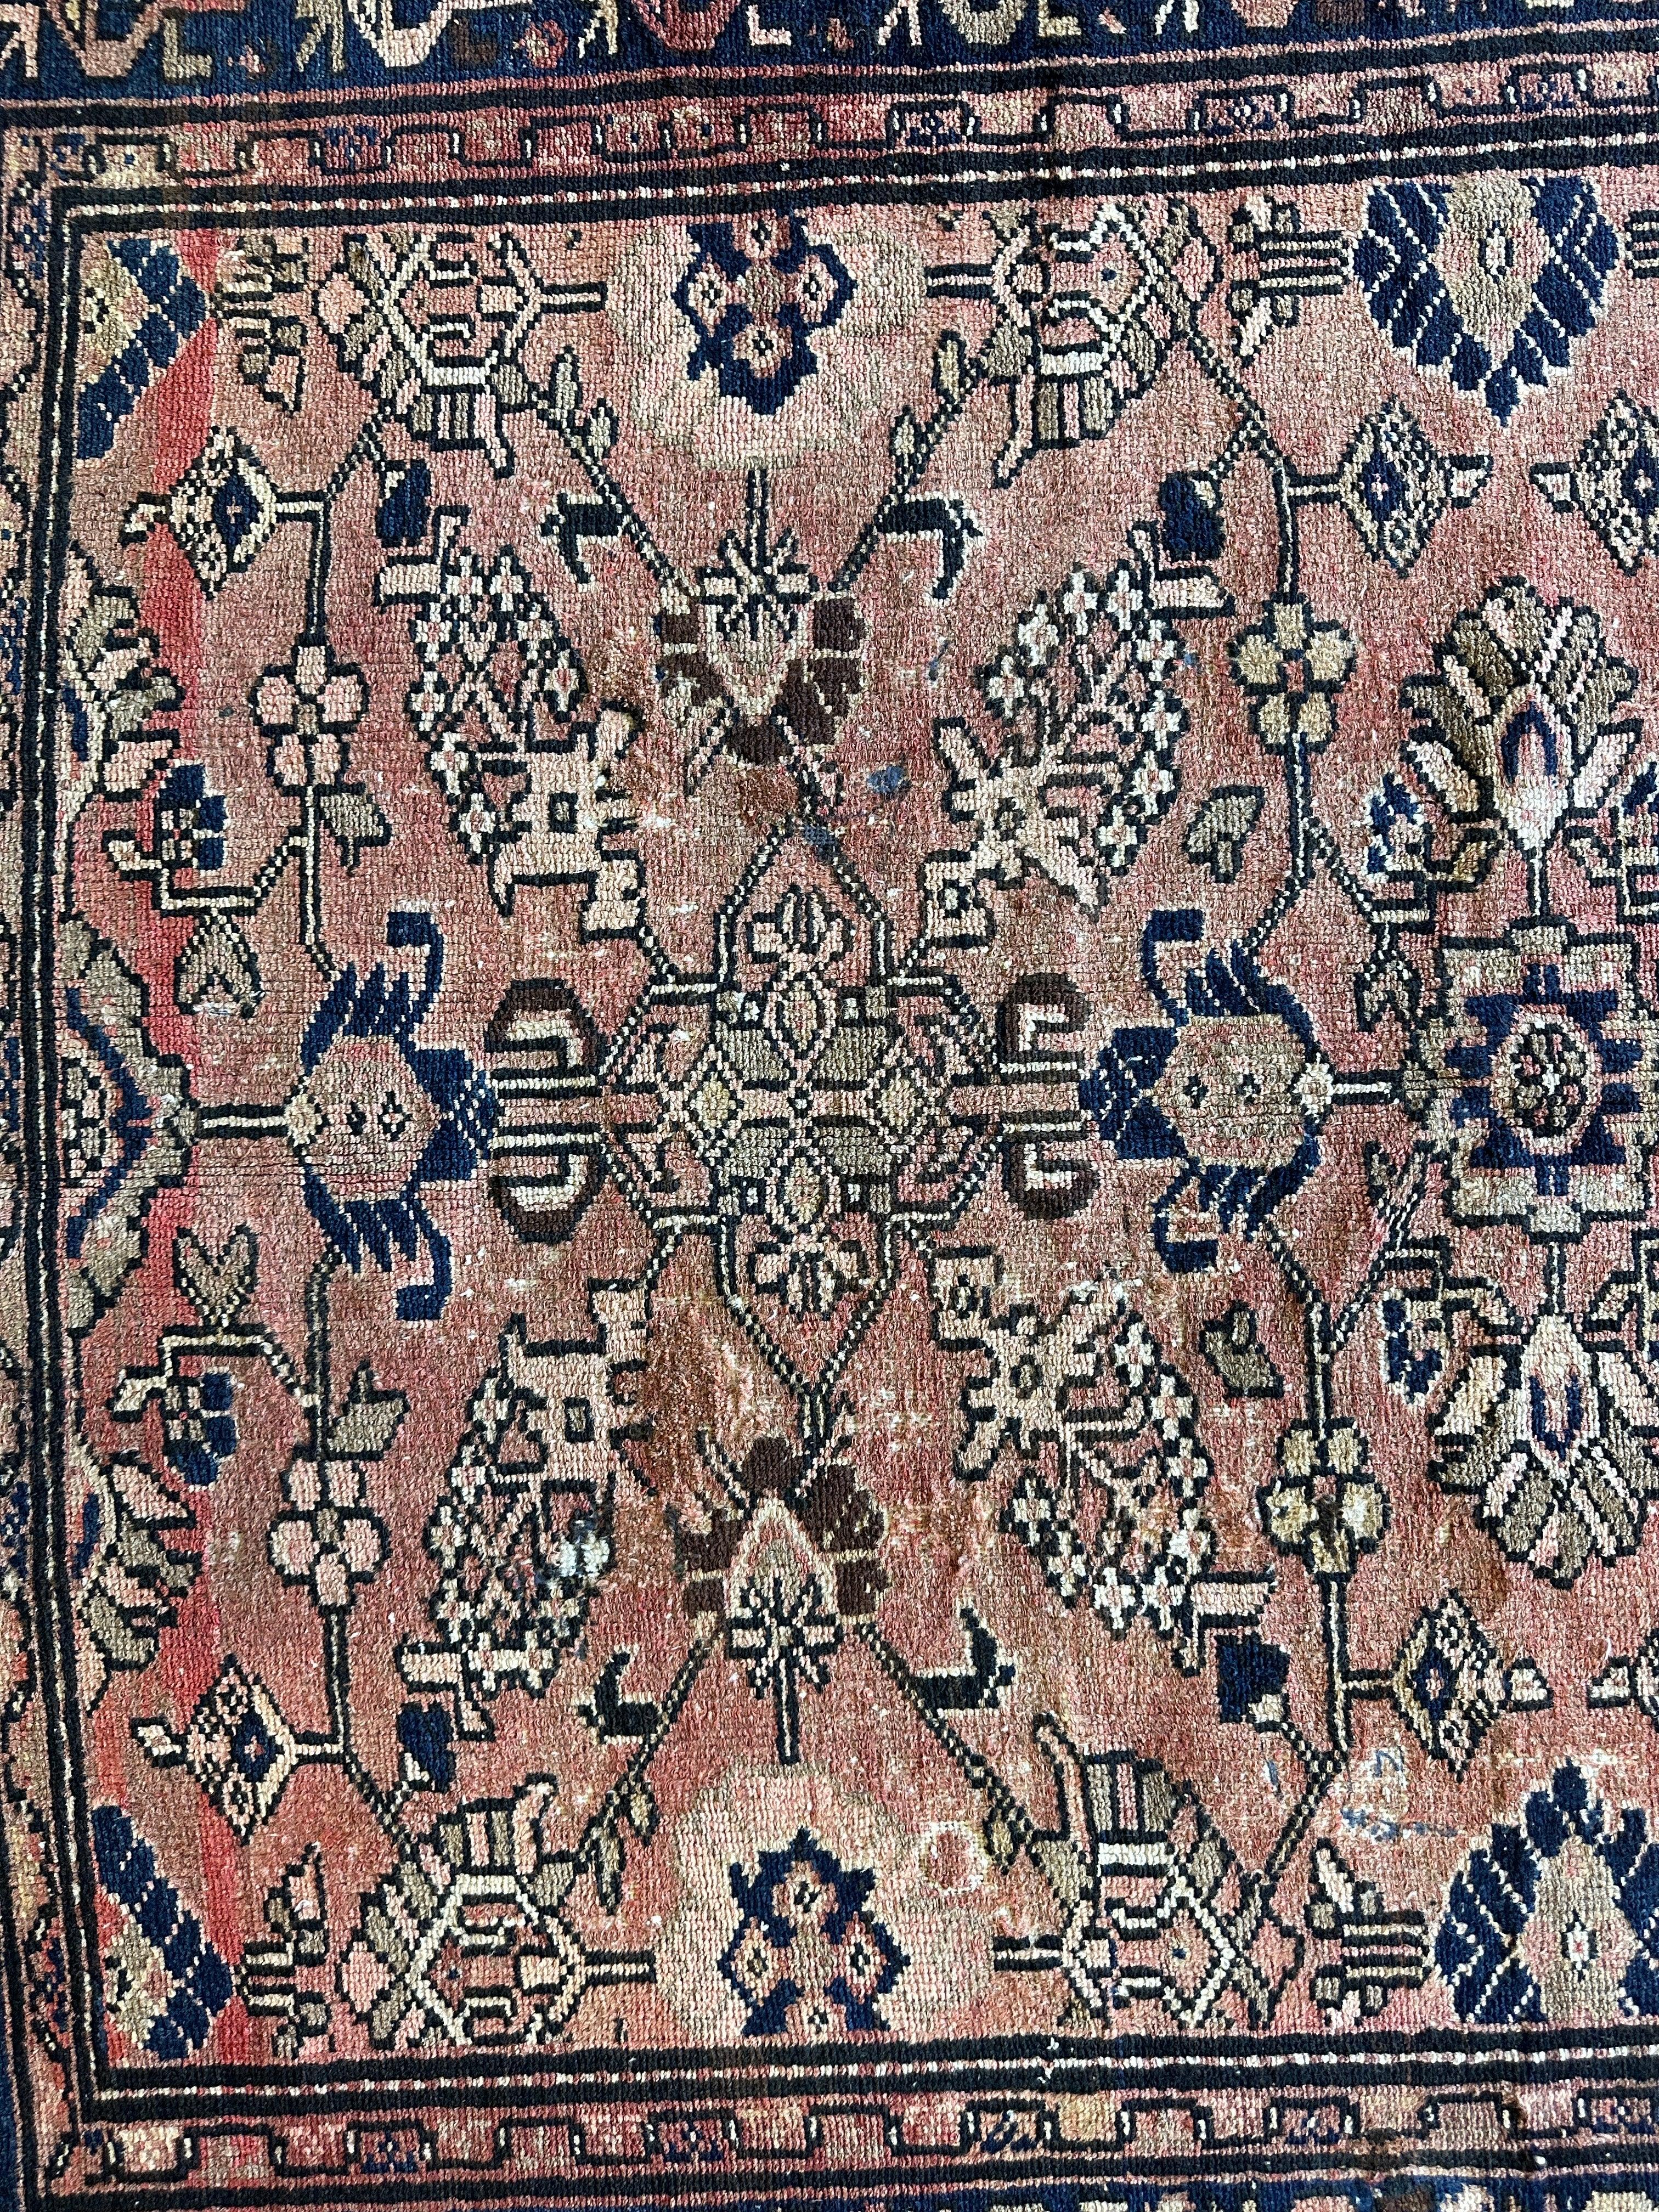 4' 4 x 9' 3 Hand Knotted Ultra Vintage Persian Wool Runner Rug